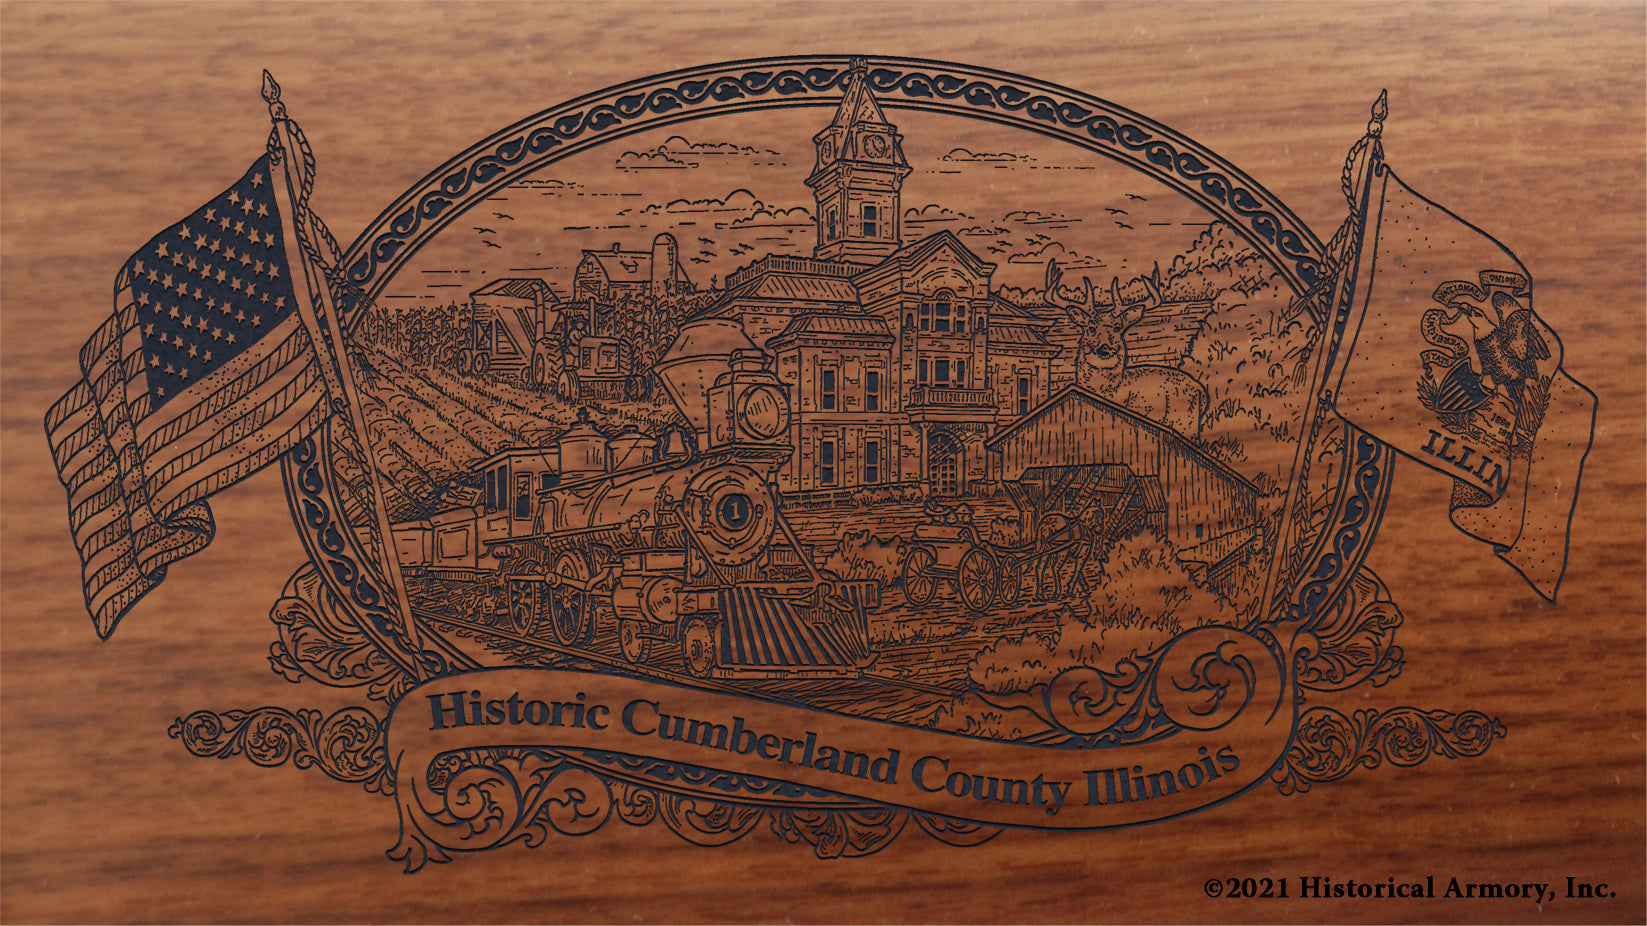 Engraved artwork | History of Cumberland County Illinois | Historical Armory